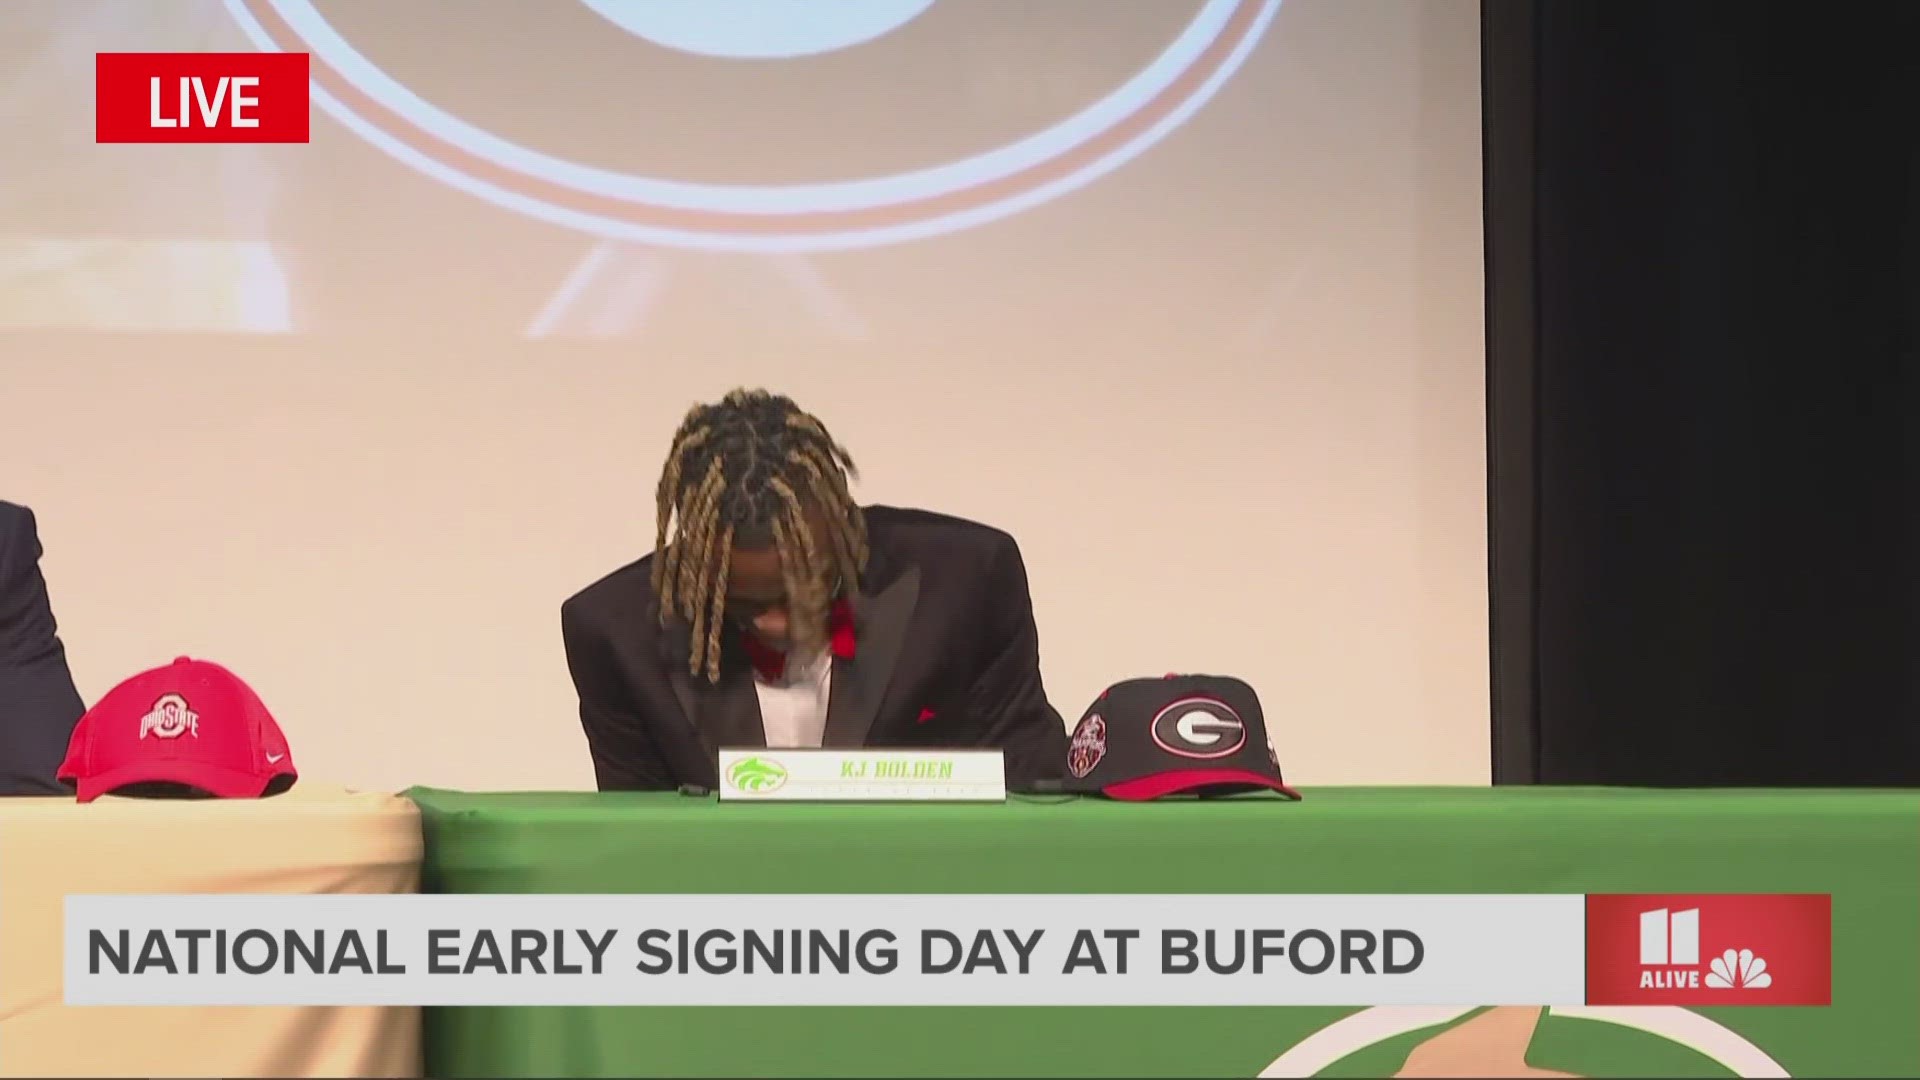 Buford High School player KJ Bolden announced he would be attending the University of Georgia in the fall.